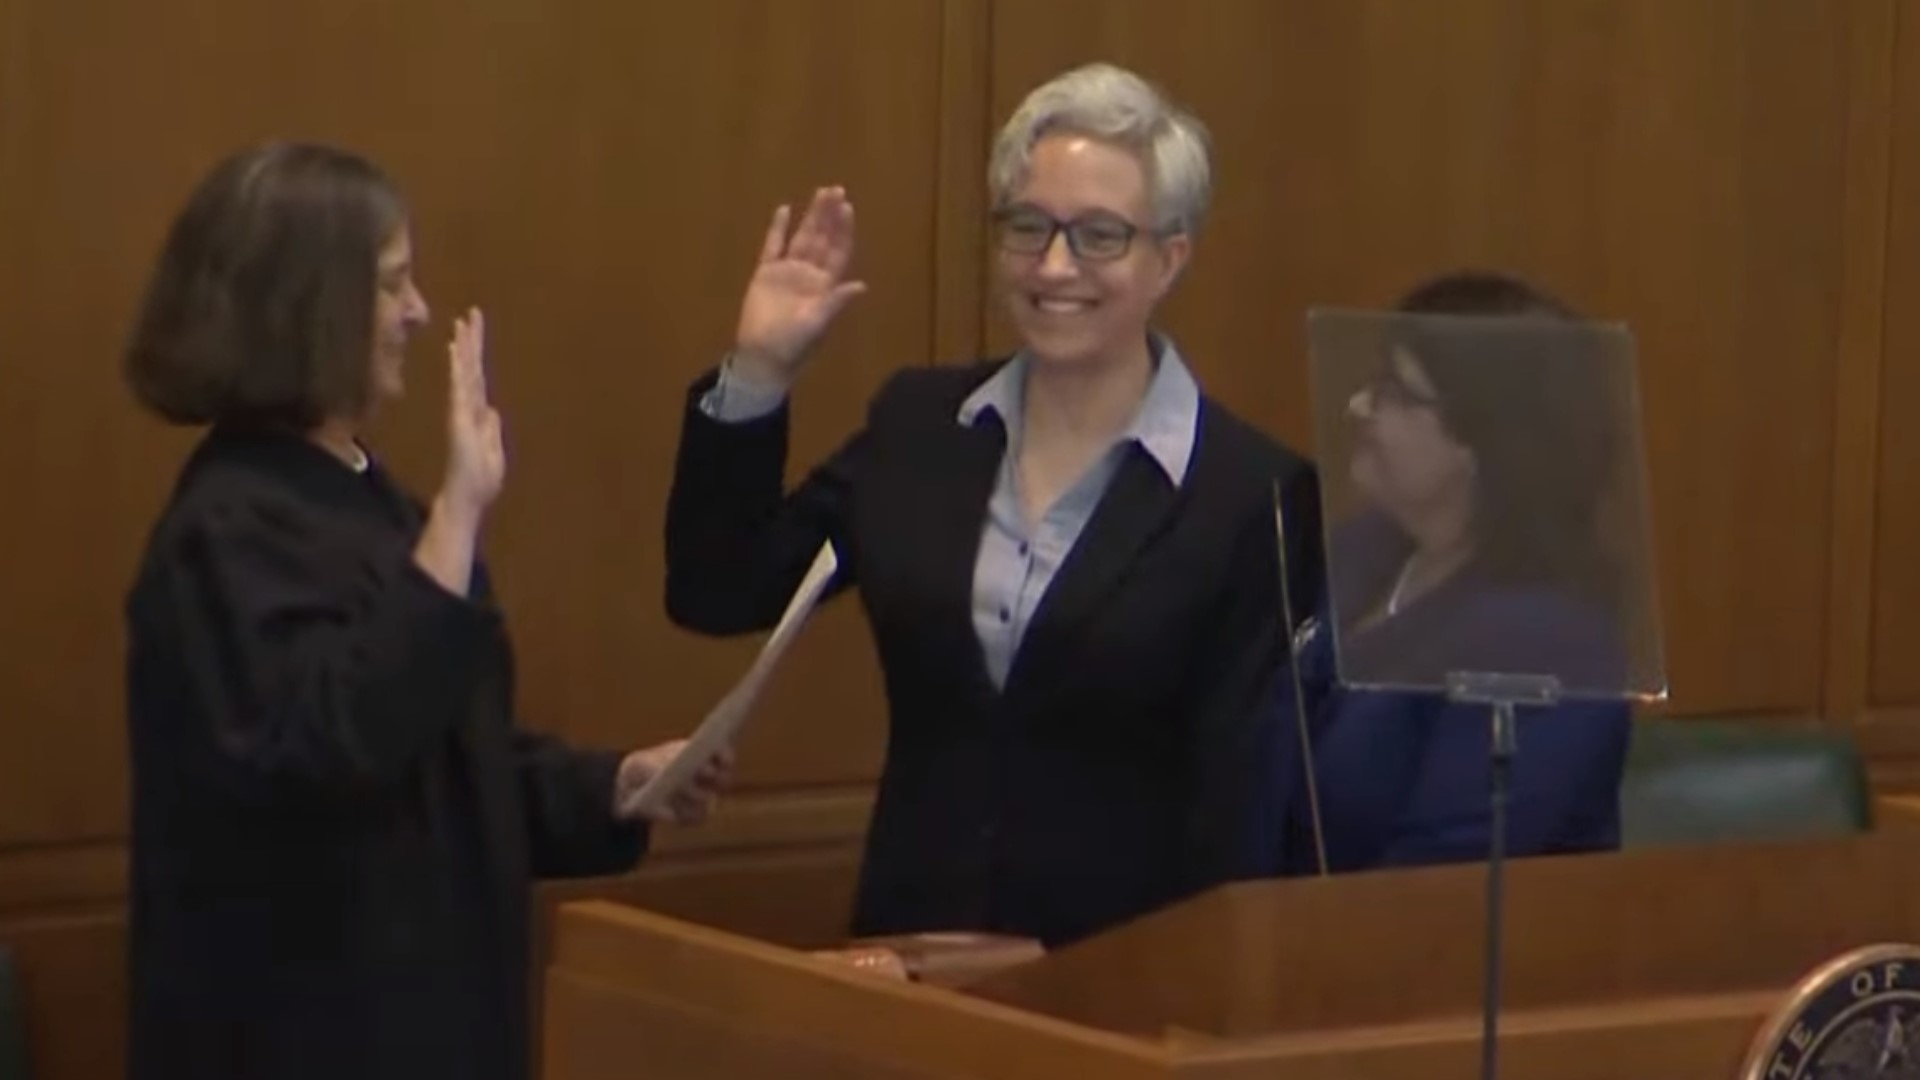 Oregon Governor Tina Kotek took the oath of office Monday afternoon and delivered her inaugural address to a joint session of the Oregon Legislature.